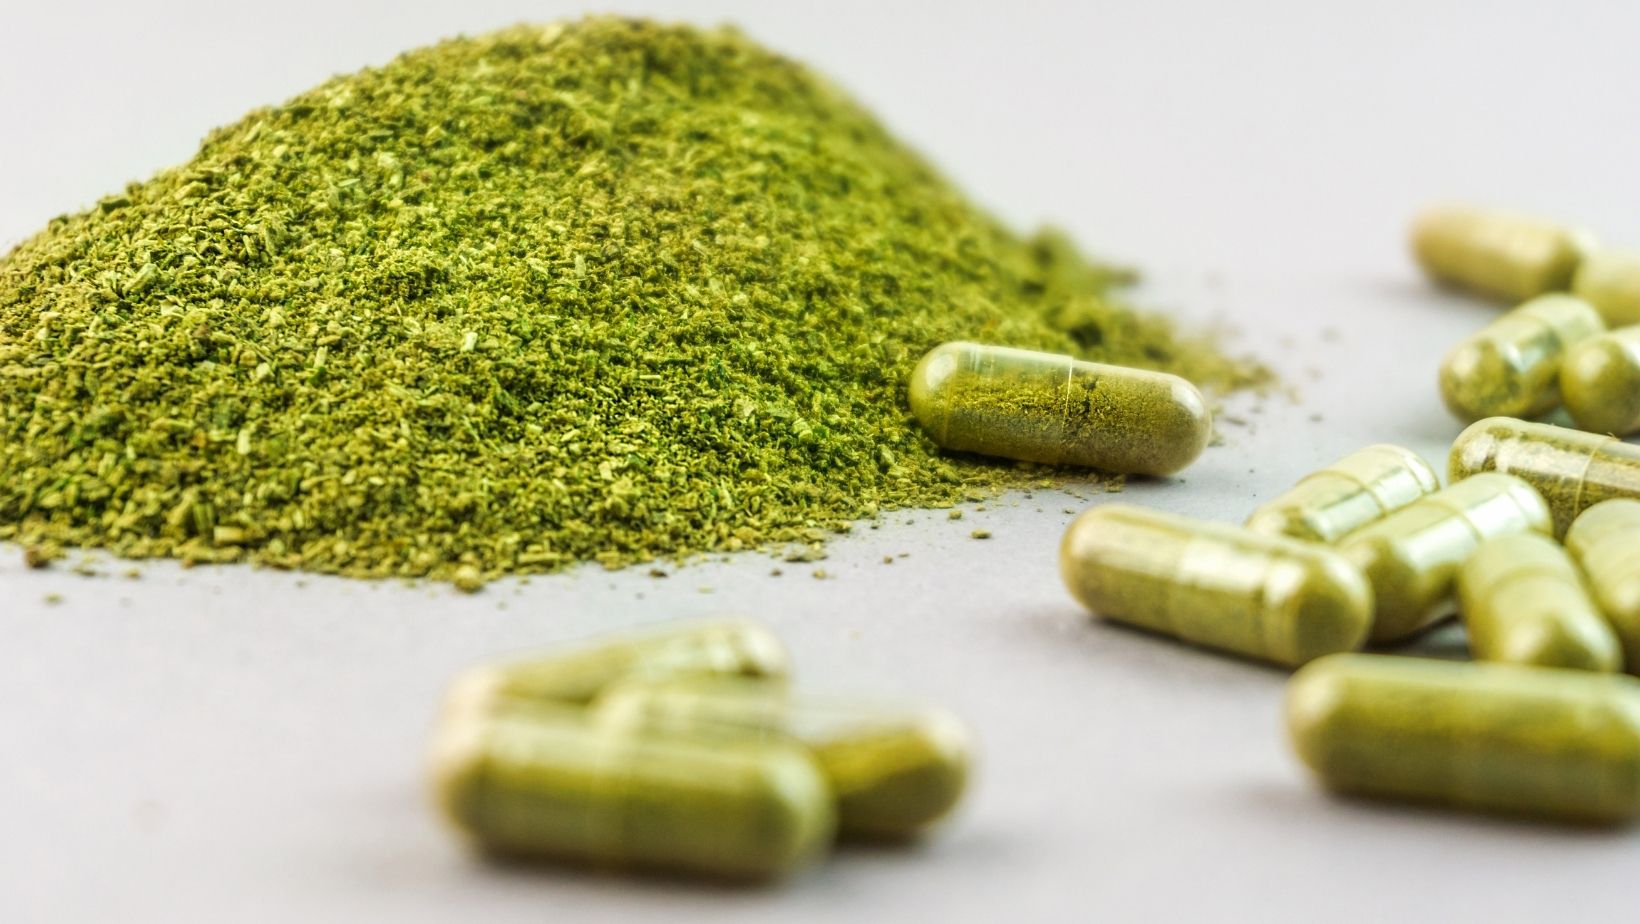 Elevate, Energize, Euphoria: The Trio of Best Kratom Effects That Will Amaze You